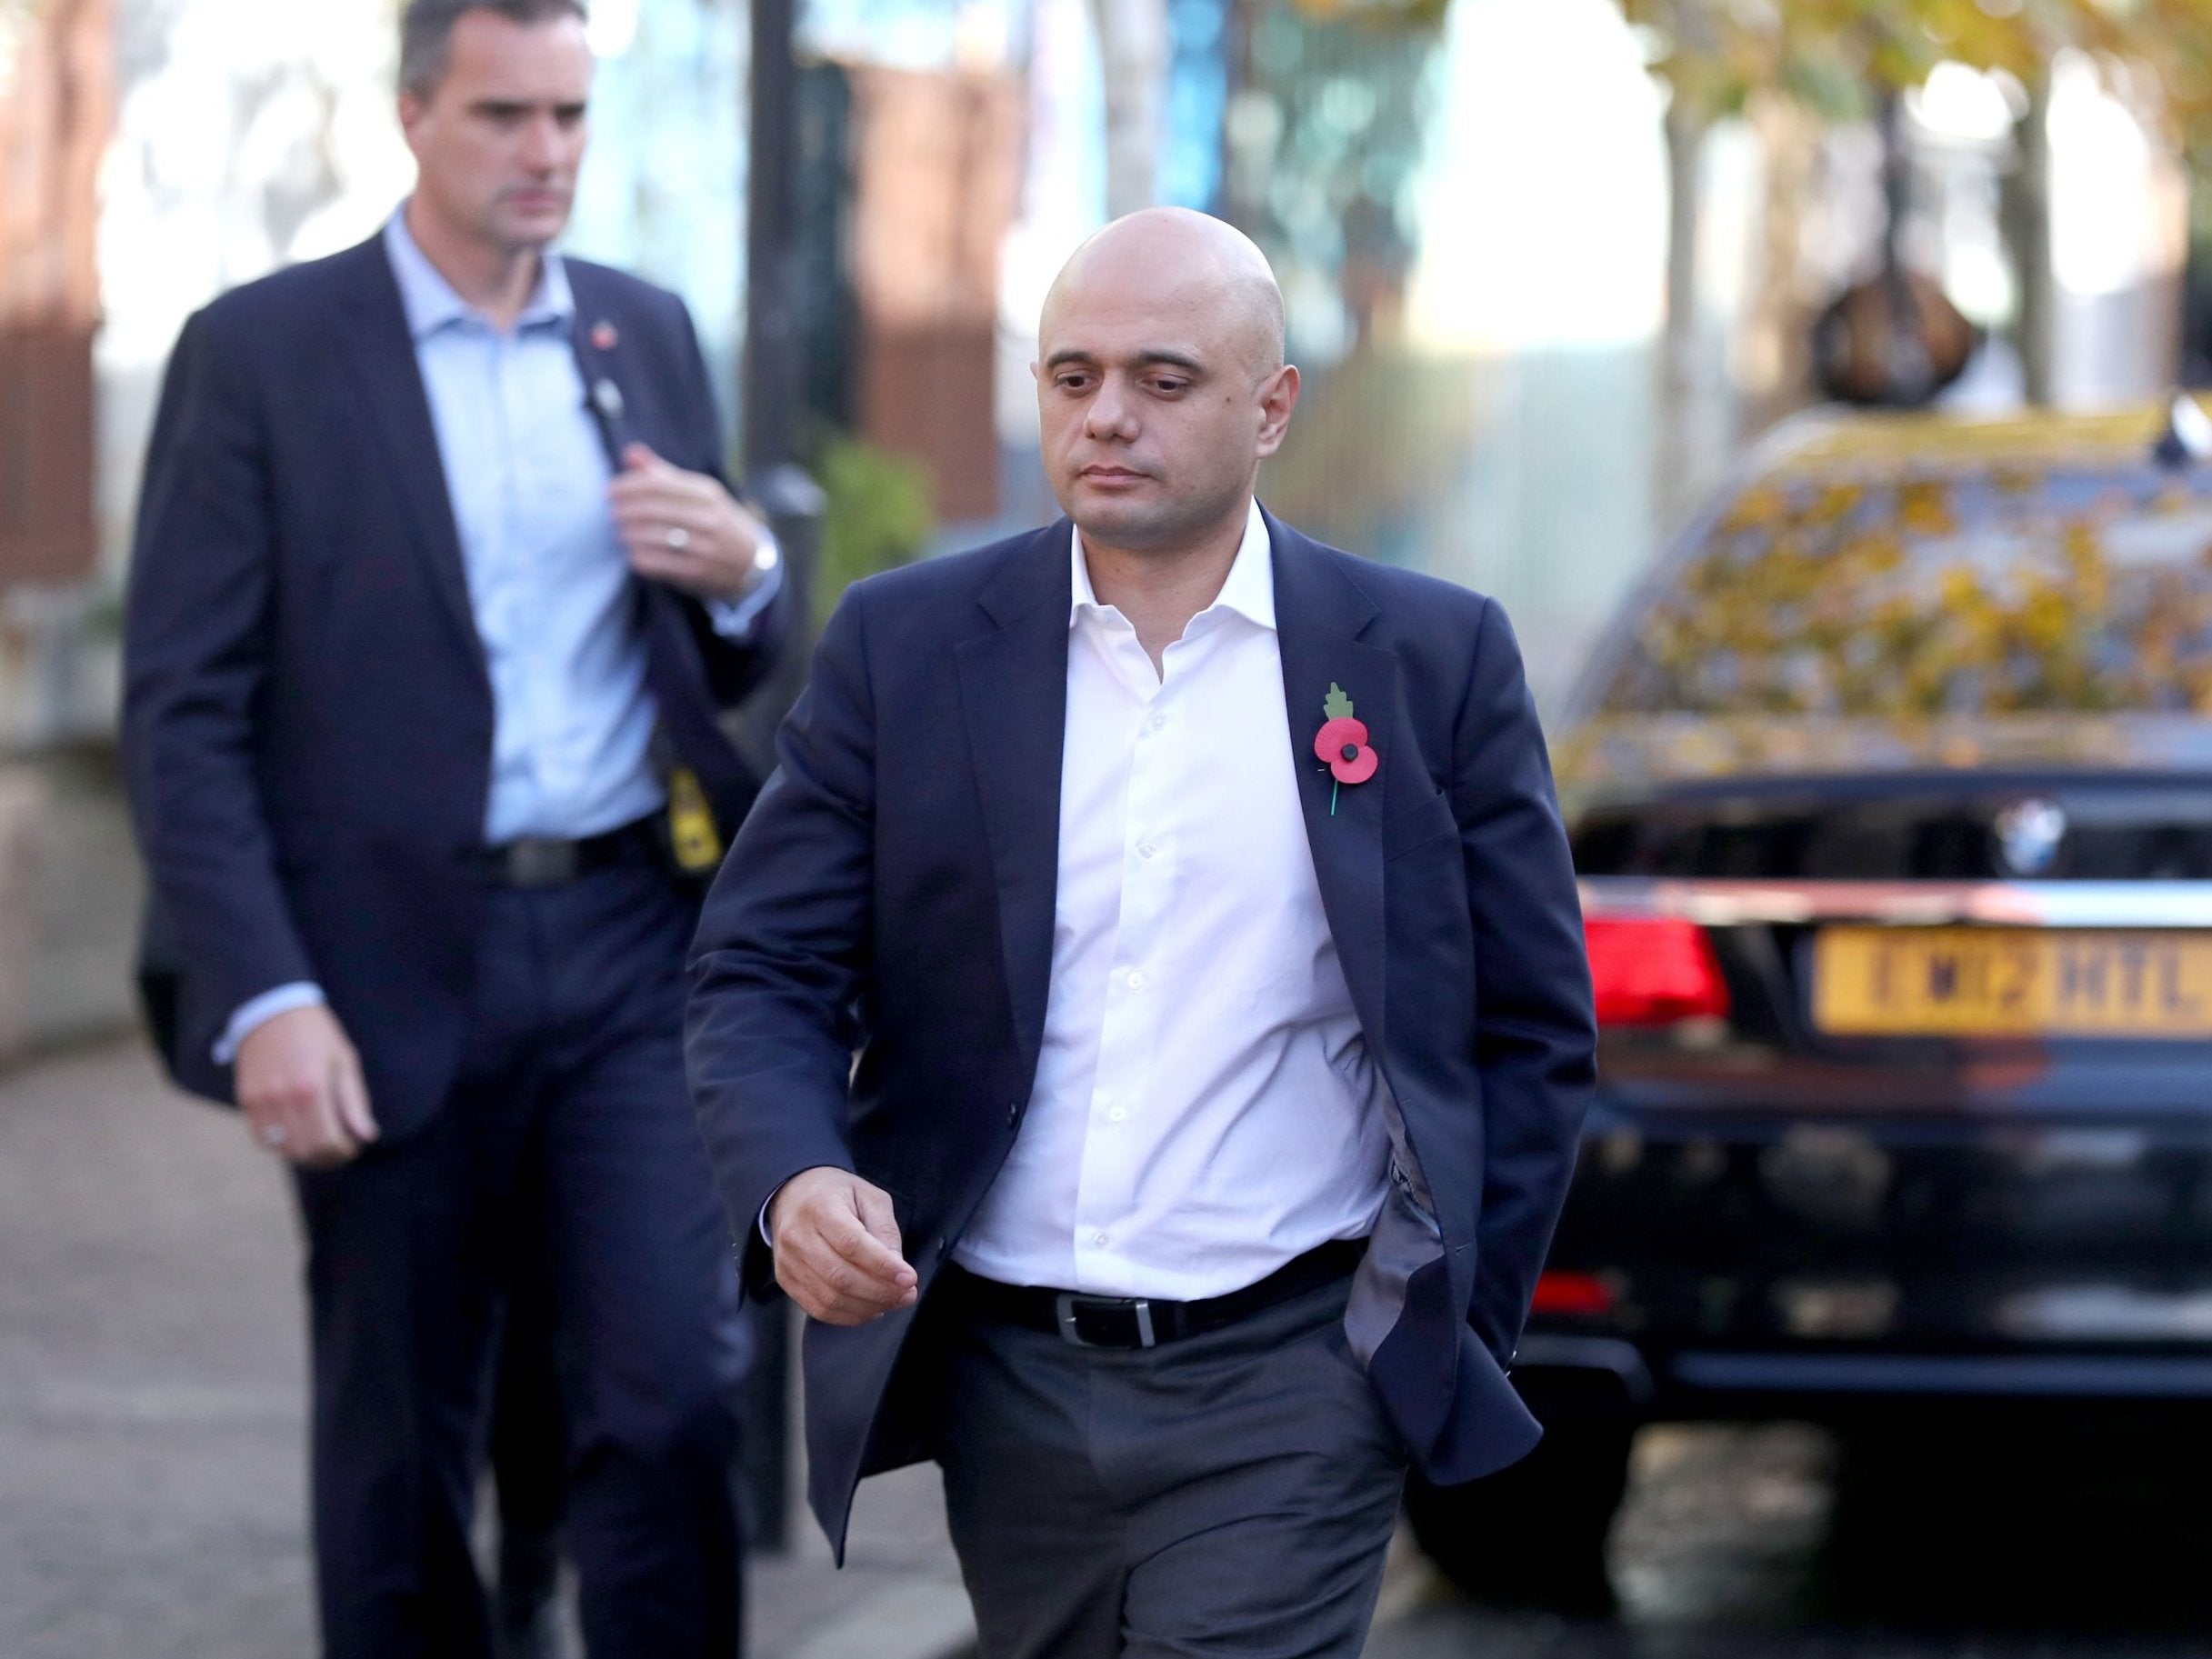 Ministerial resignations provoked fear among police that Sajid Javid would leave the Home Office, amid progress on financial negotiations